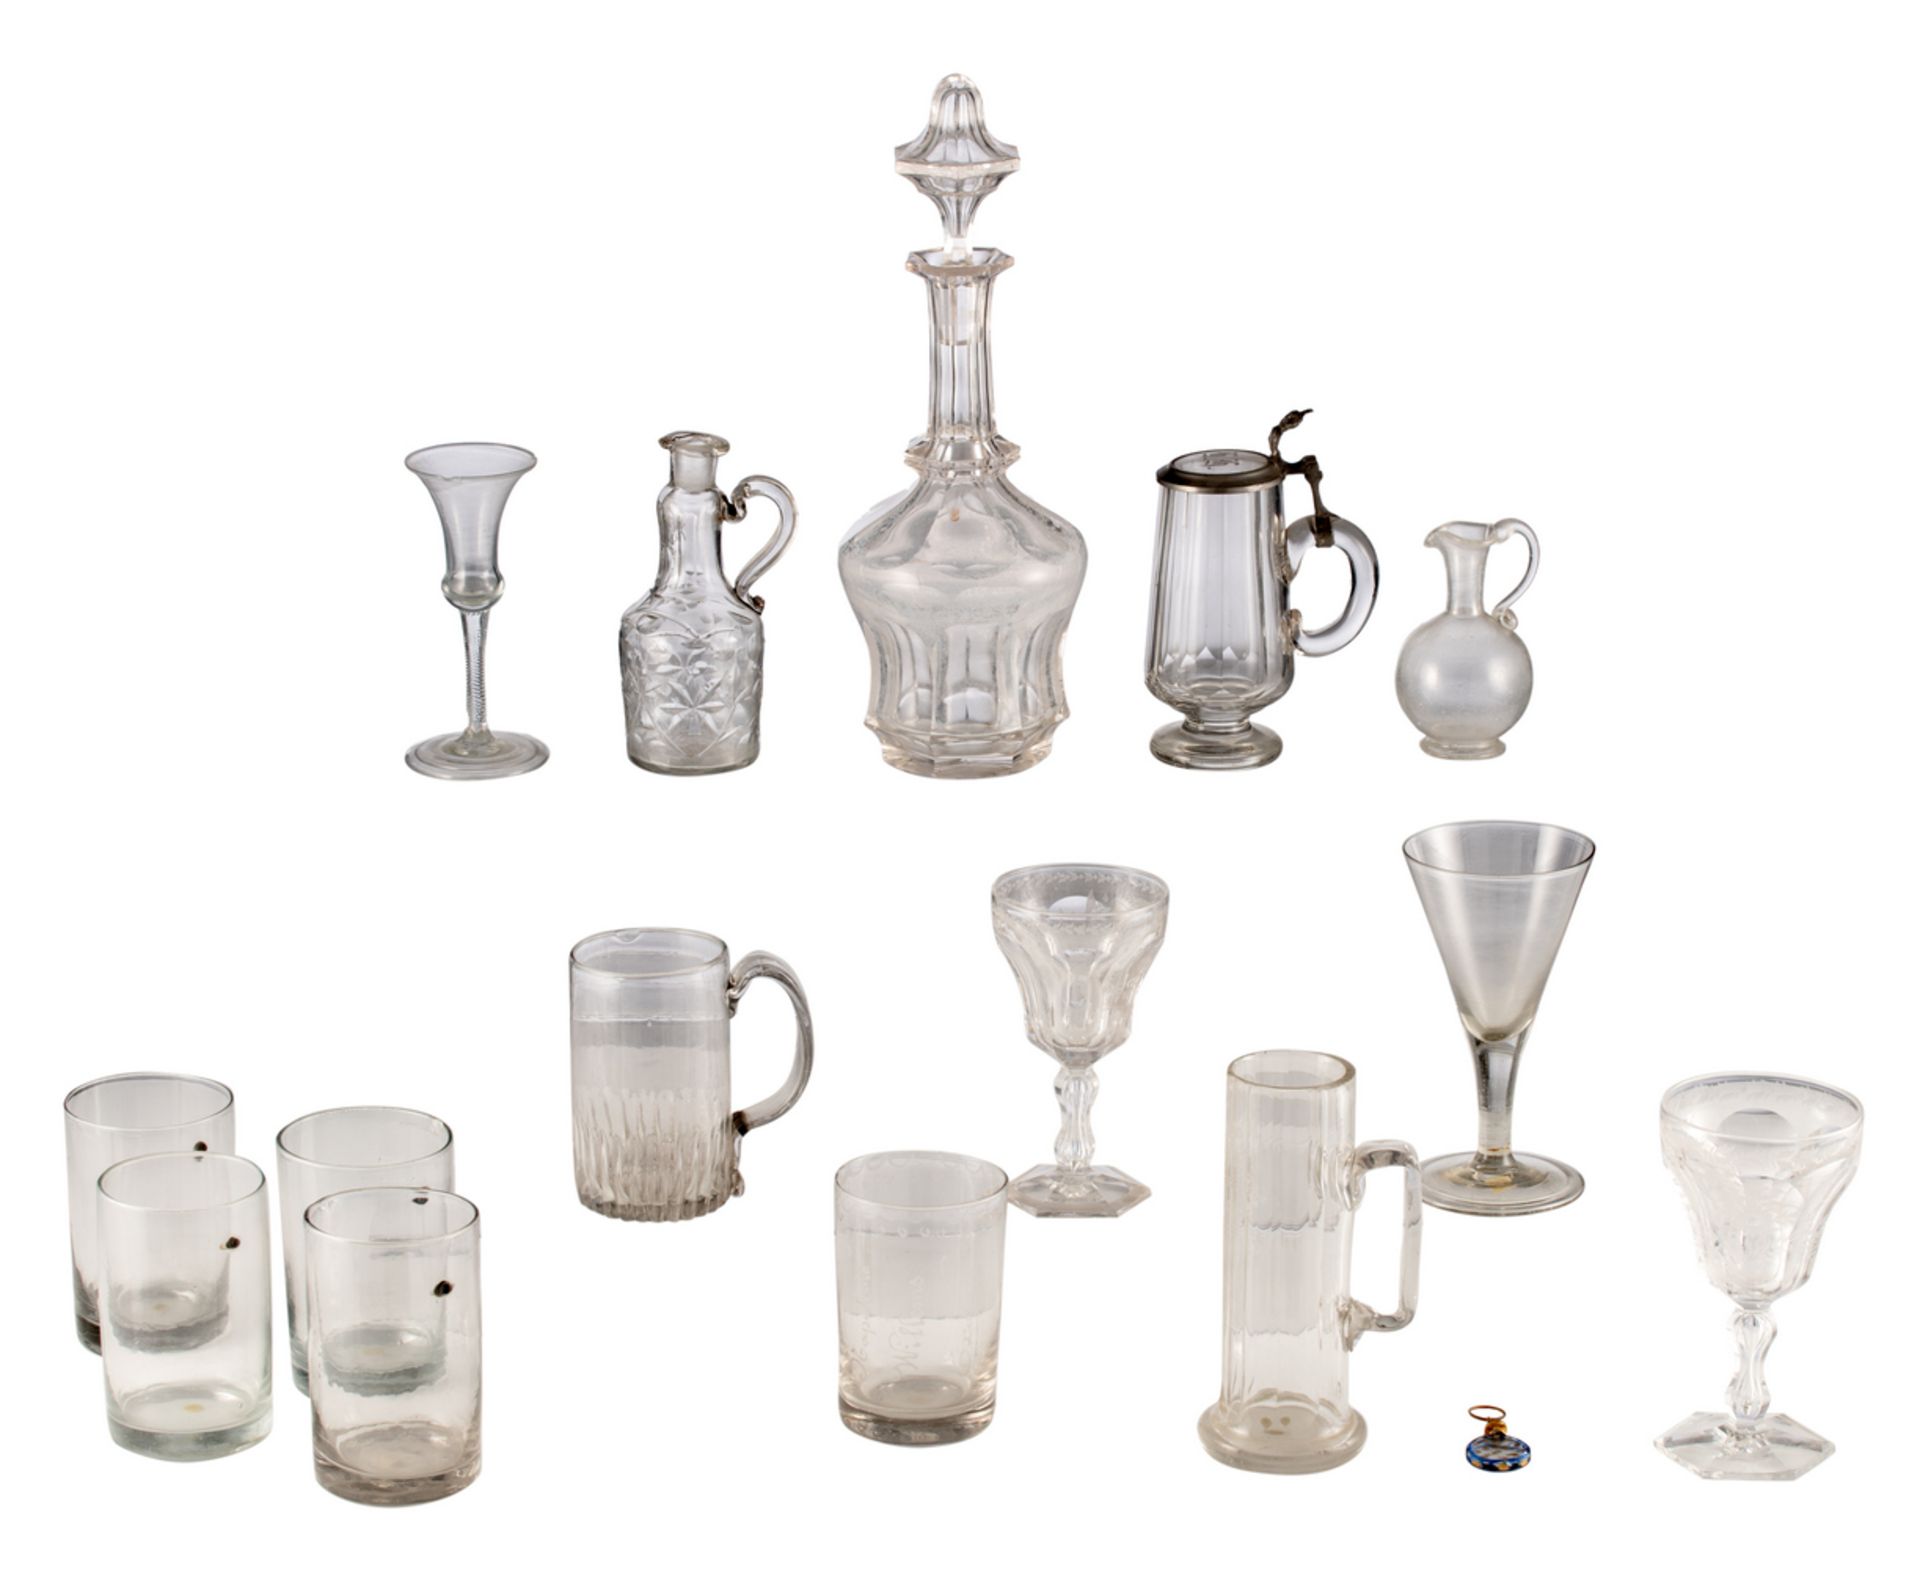 A collection of 18th and 19thC glassware, H 12 - 37 cm